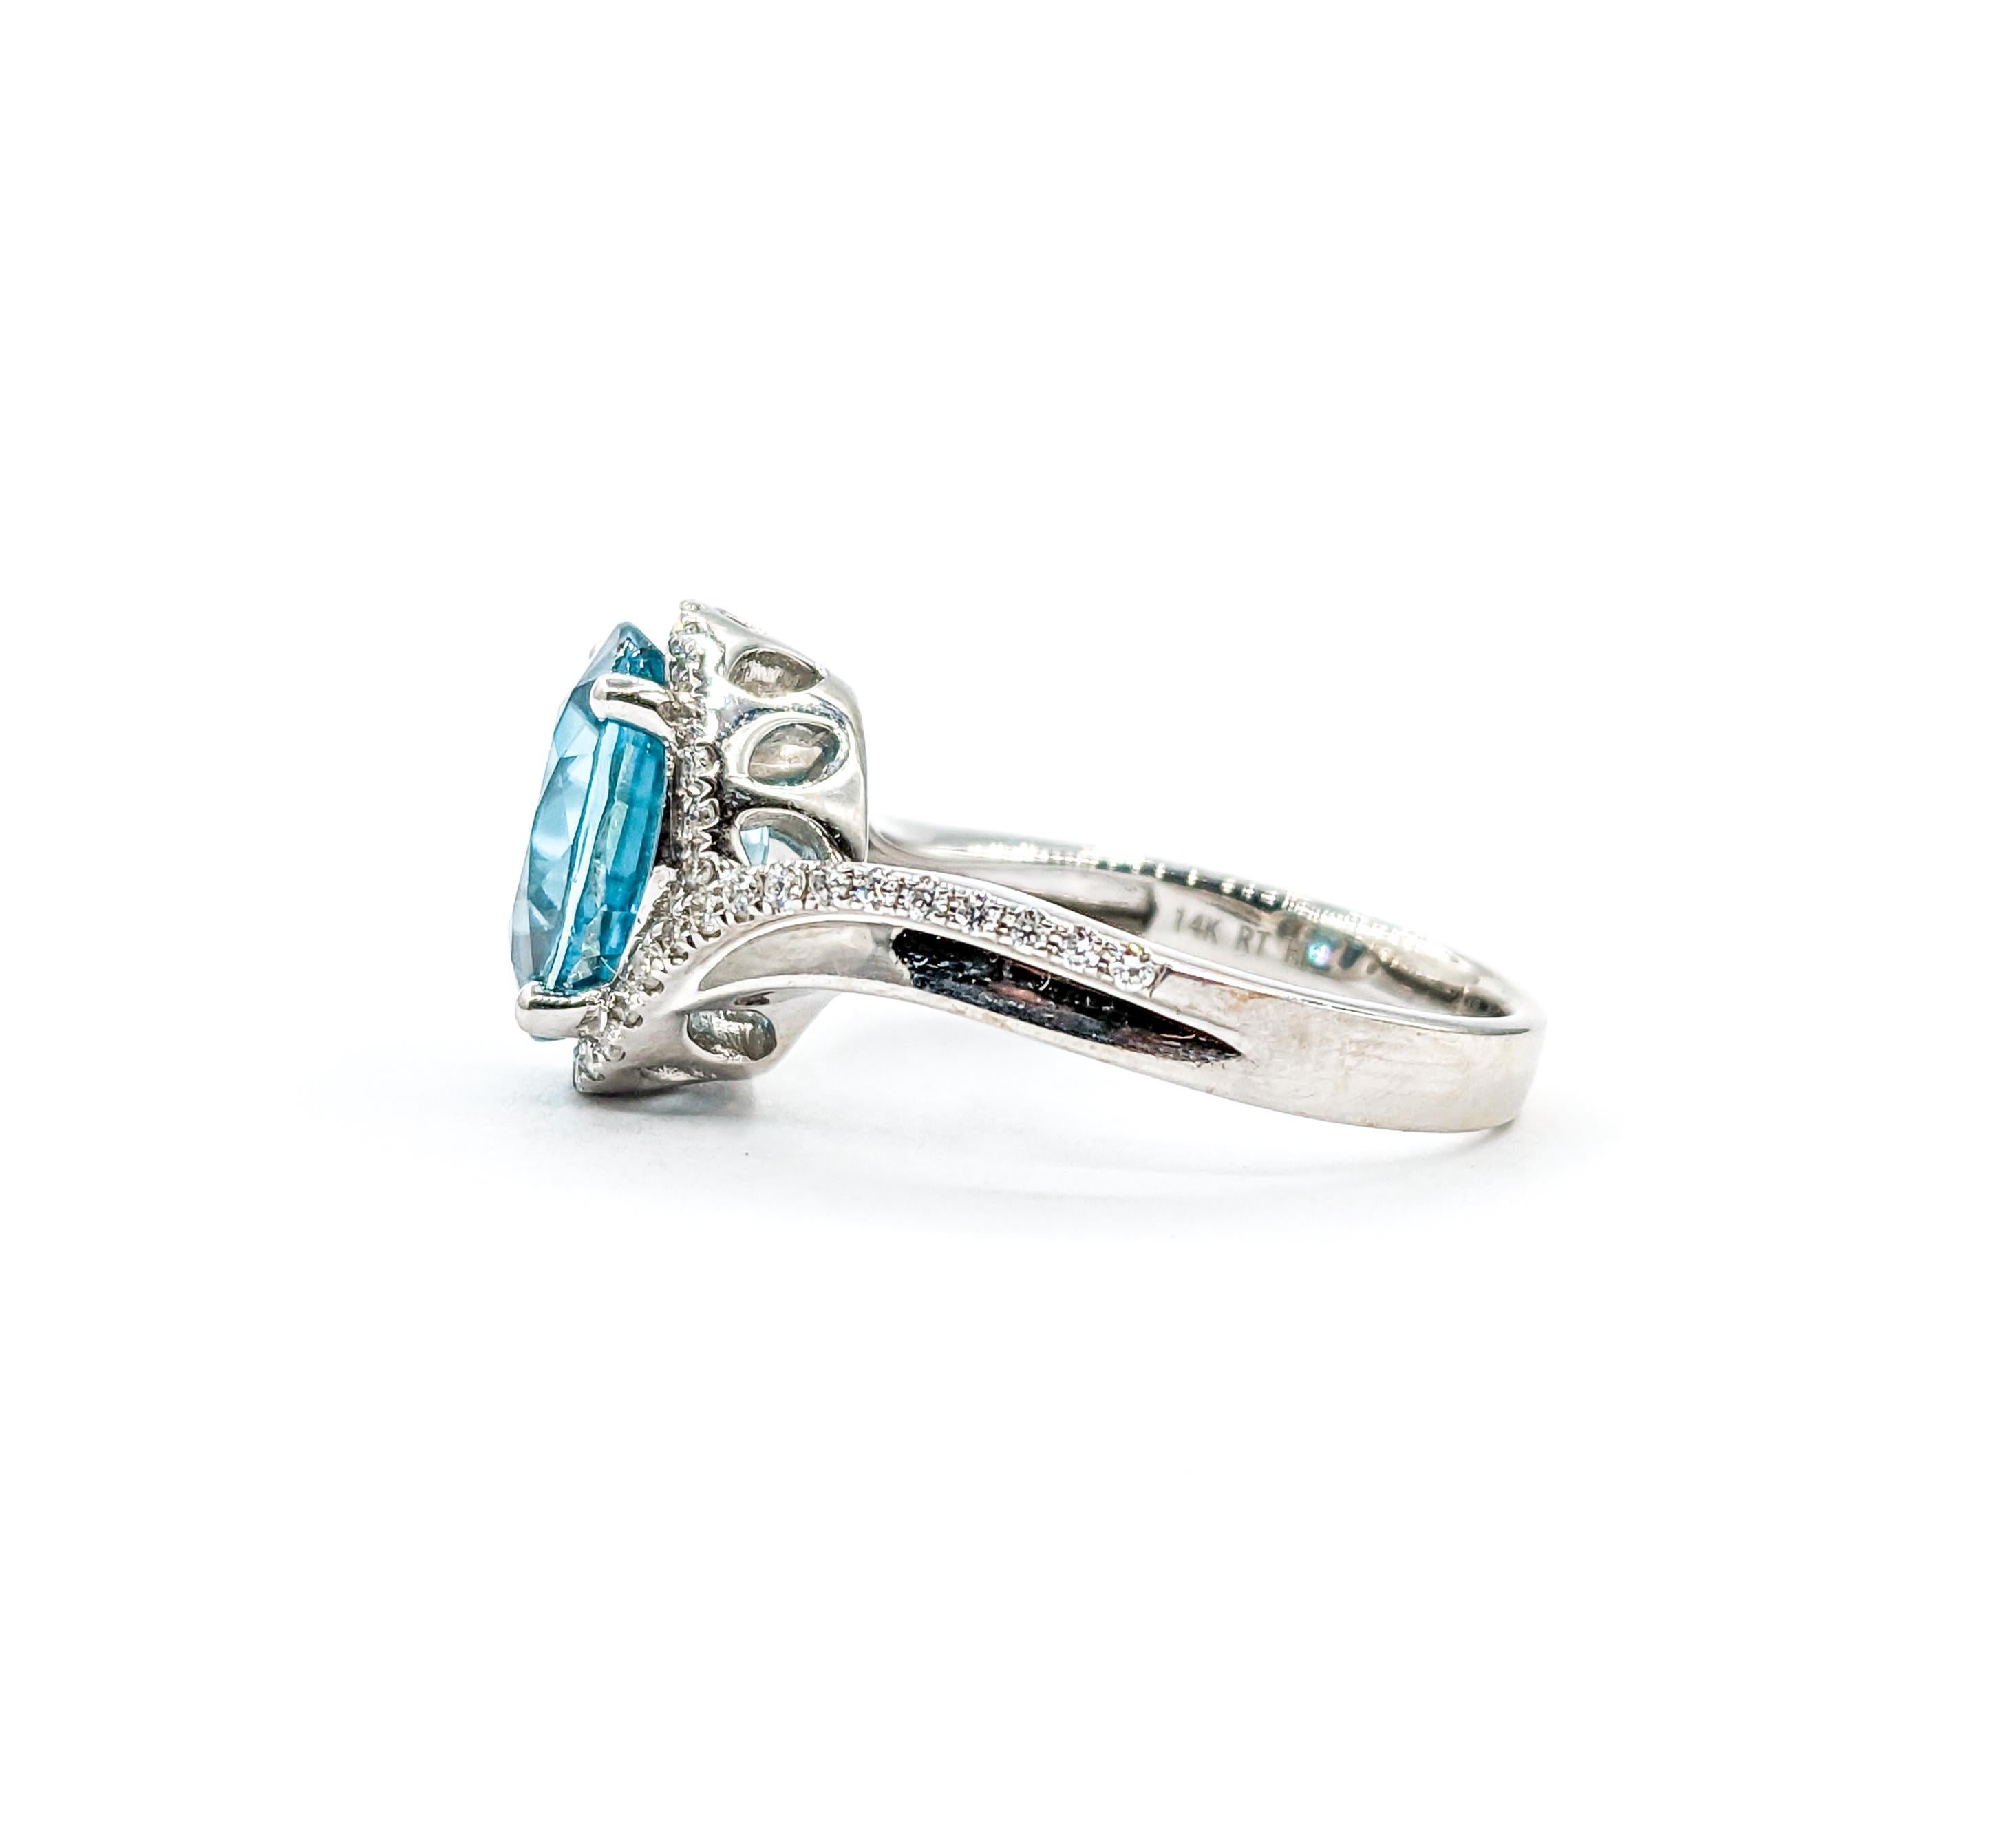 5.0ct Blue Zircon & Diamond Ring In White Gold For Sale 3